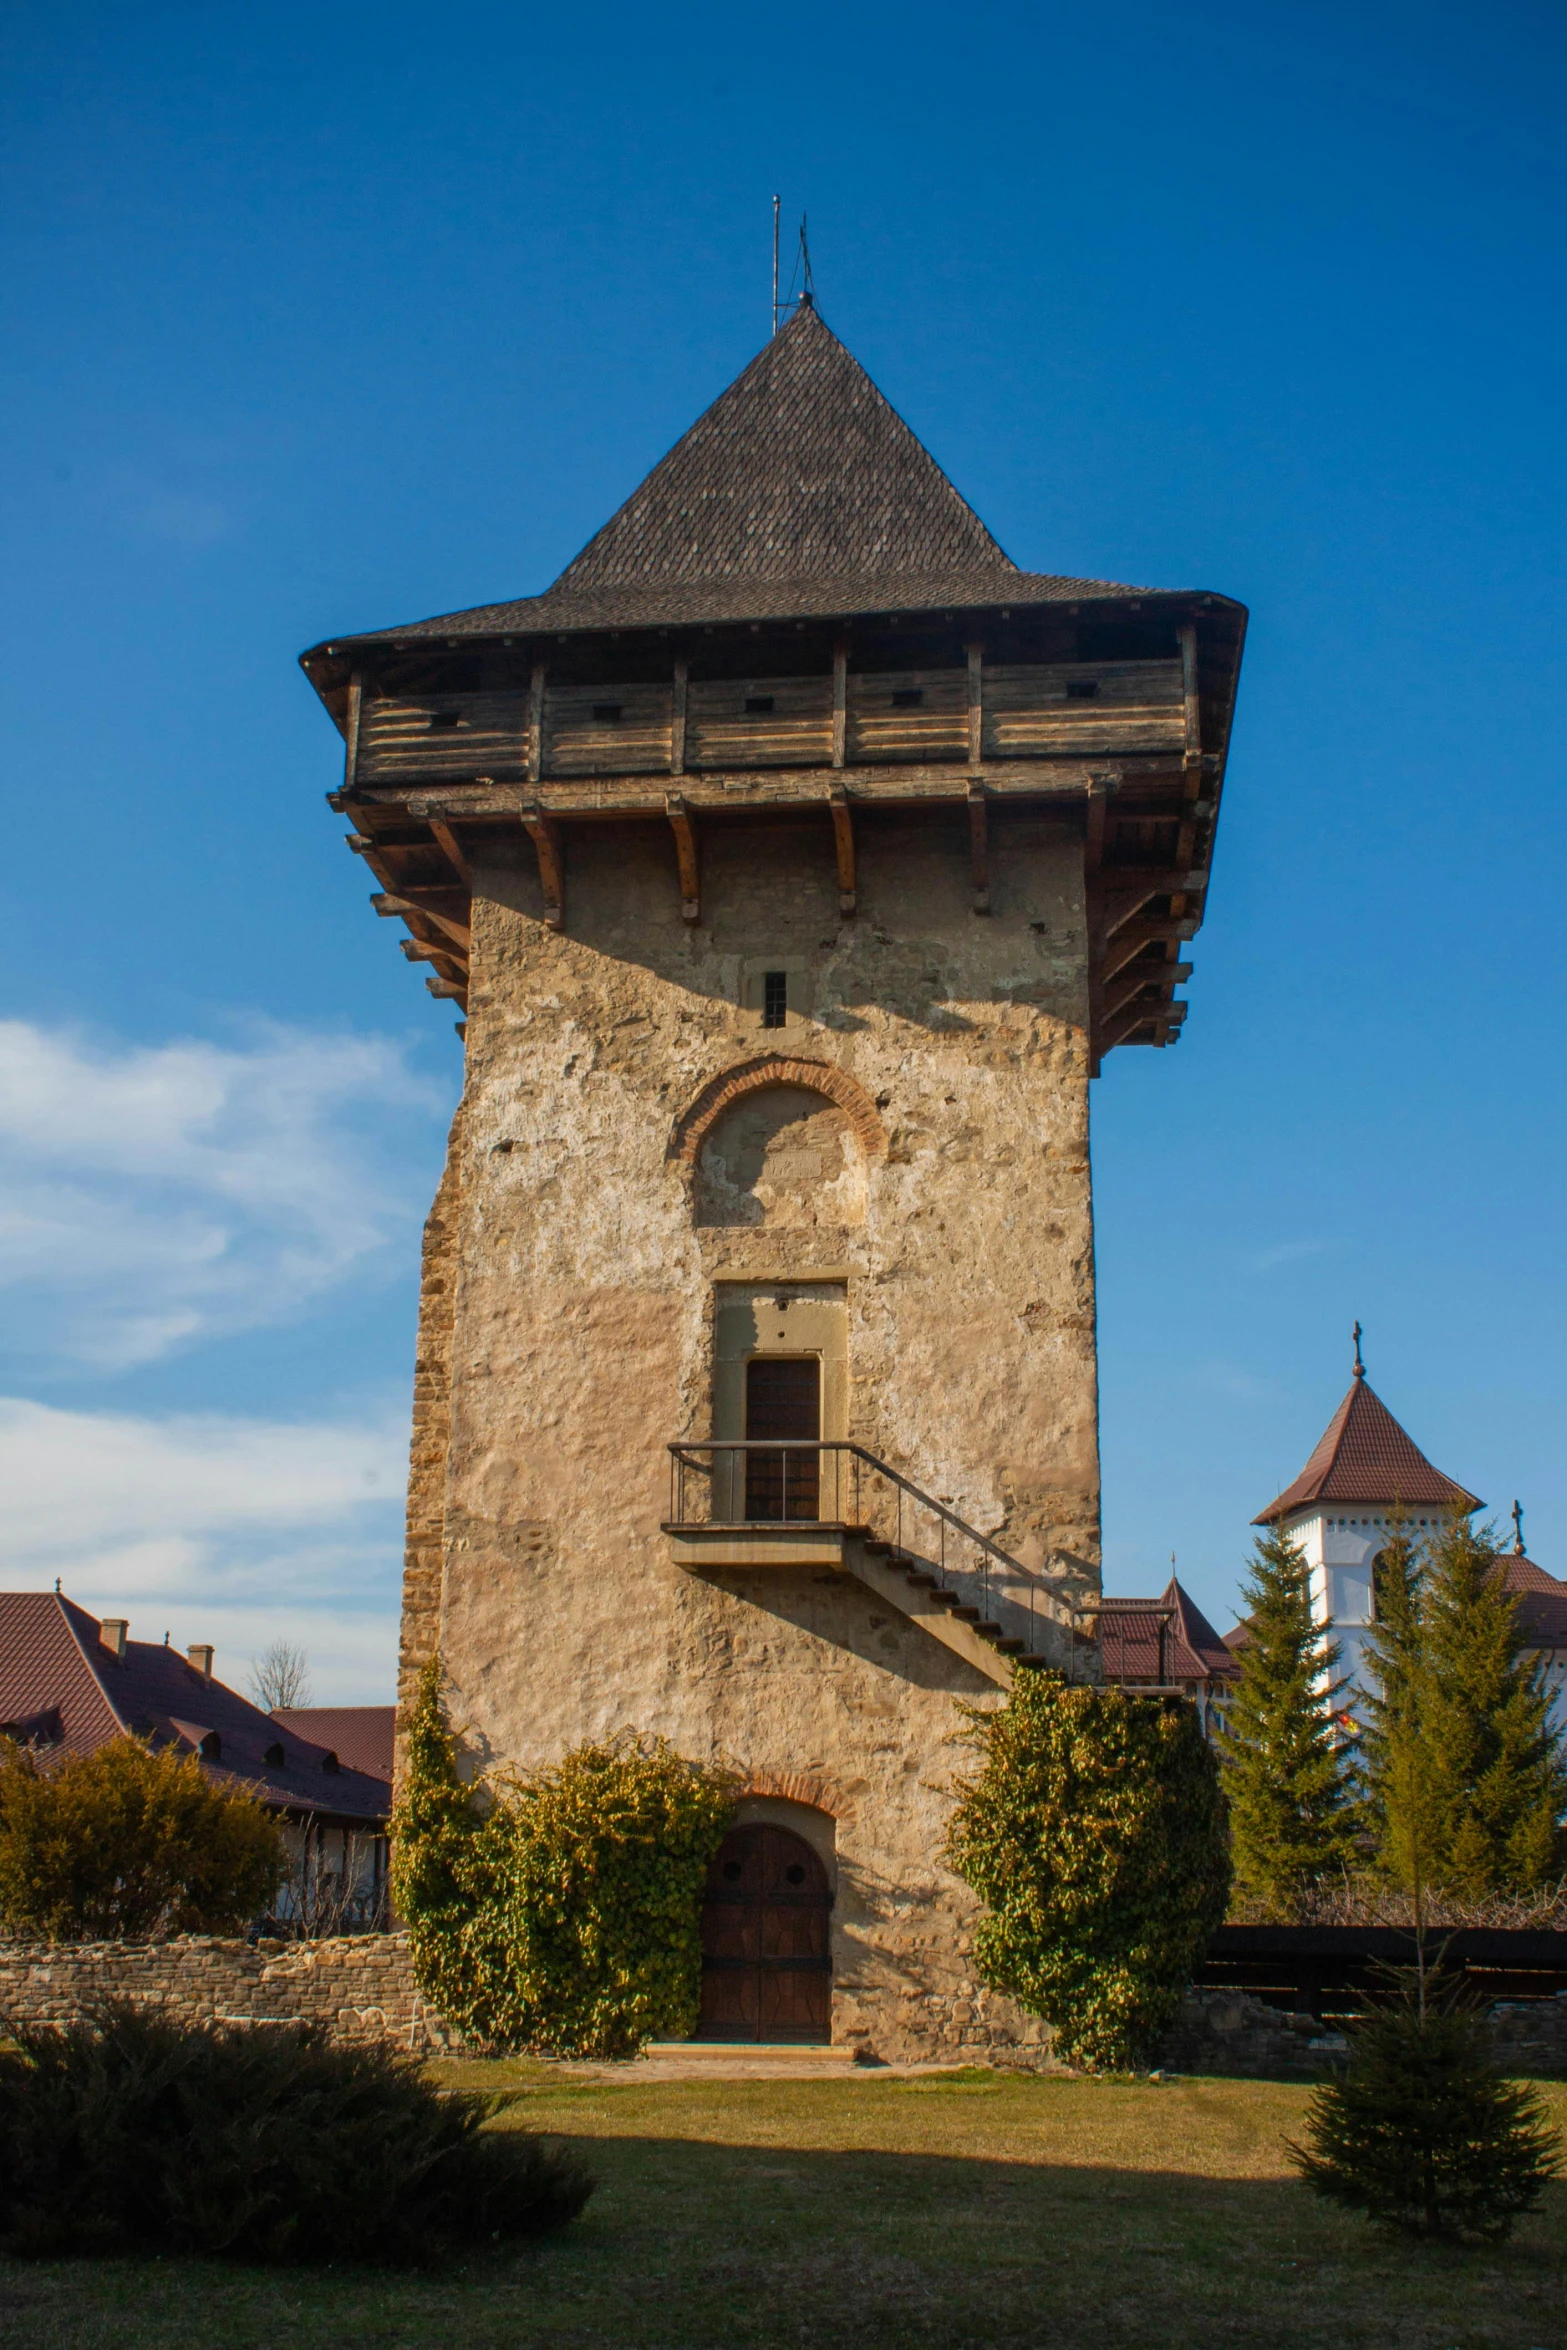 a tower with an opening is shown against a blue sky